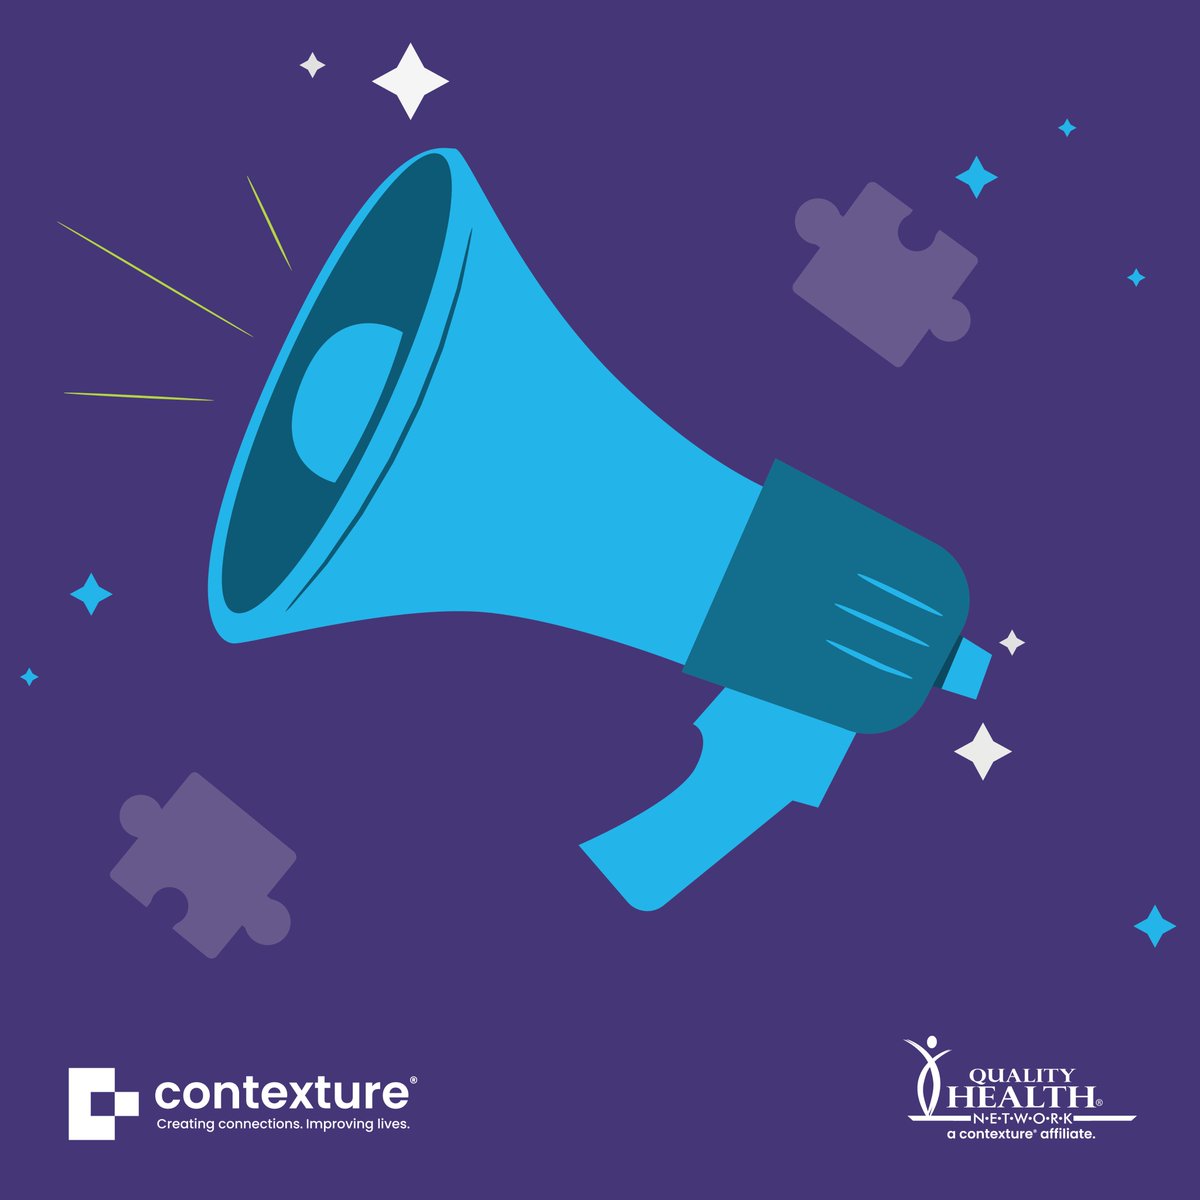 Contexture and @QualityHealthN1 have affiliated to unify health information exchange in Colorado. This affiliation will continue to build upon both organizations' successes in serving Colorado communities. Learn more: contexture.org/quality-health…